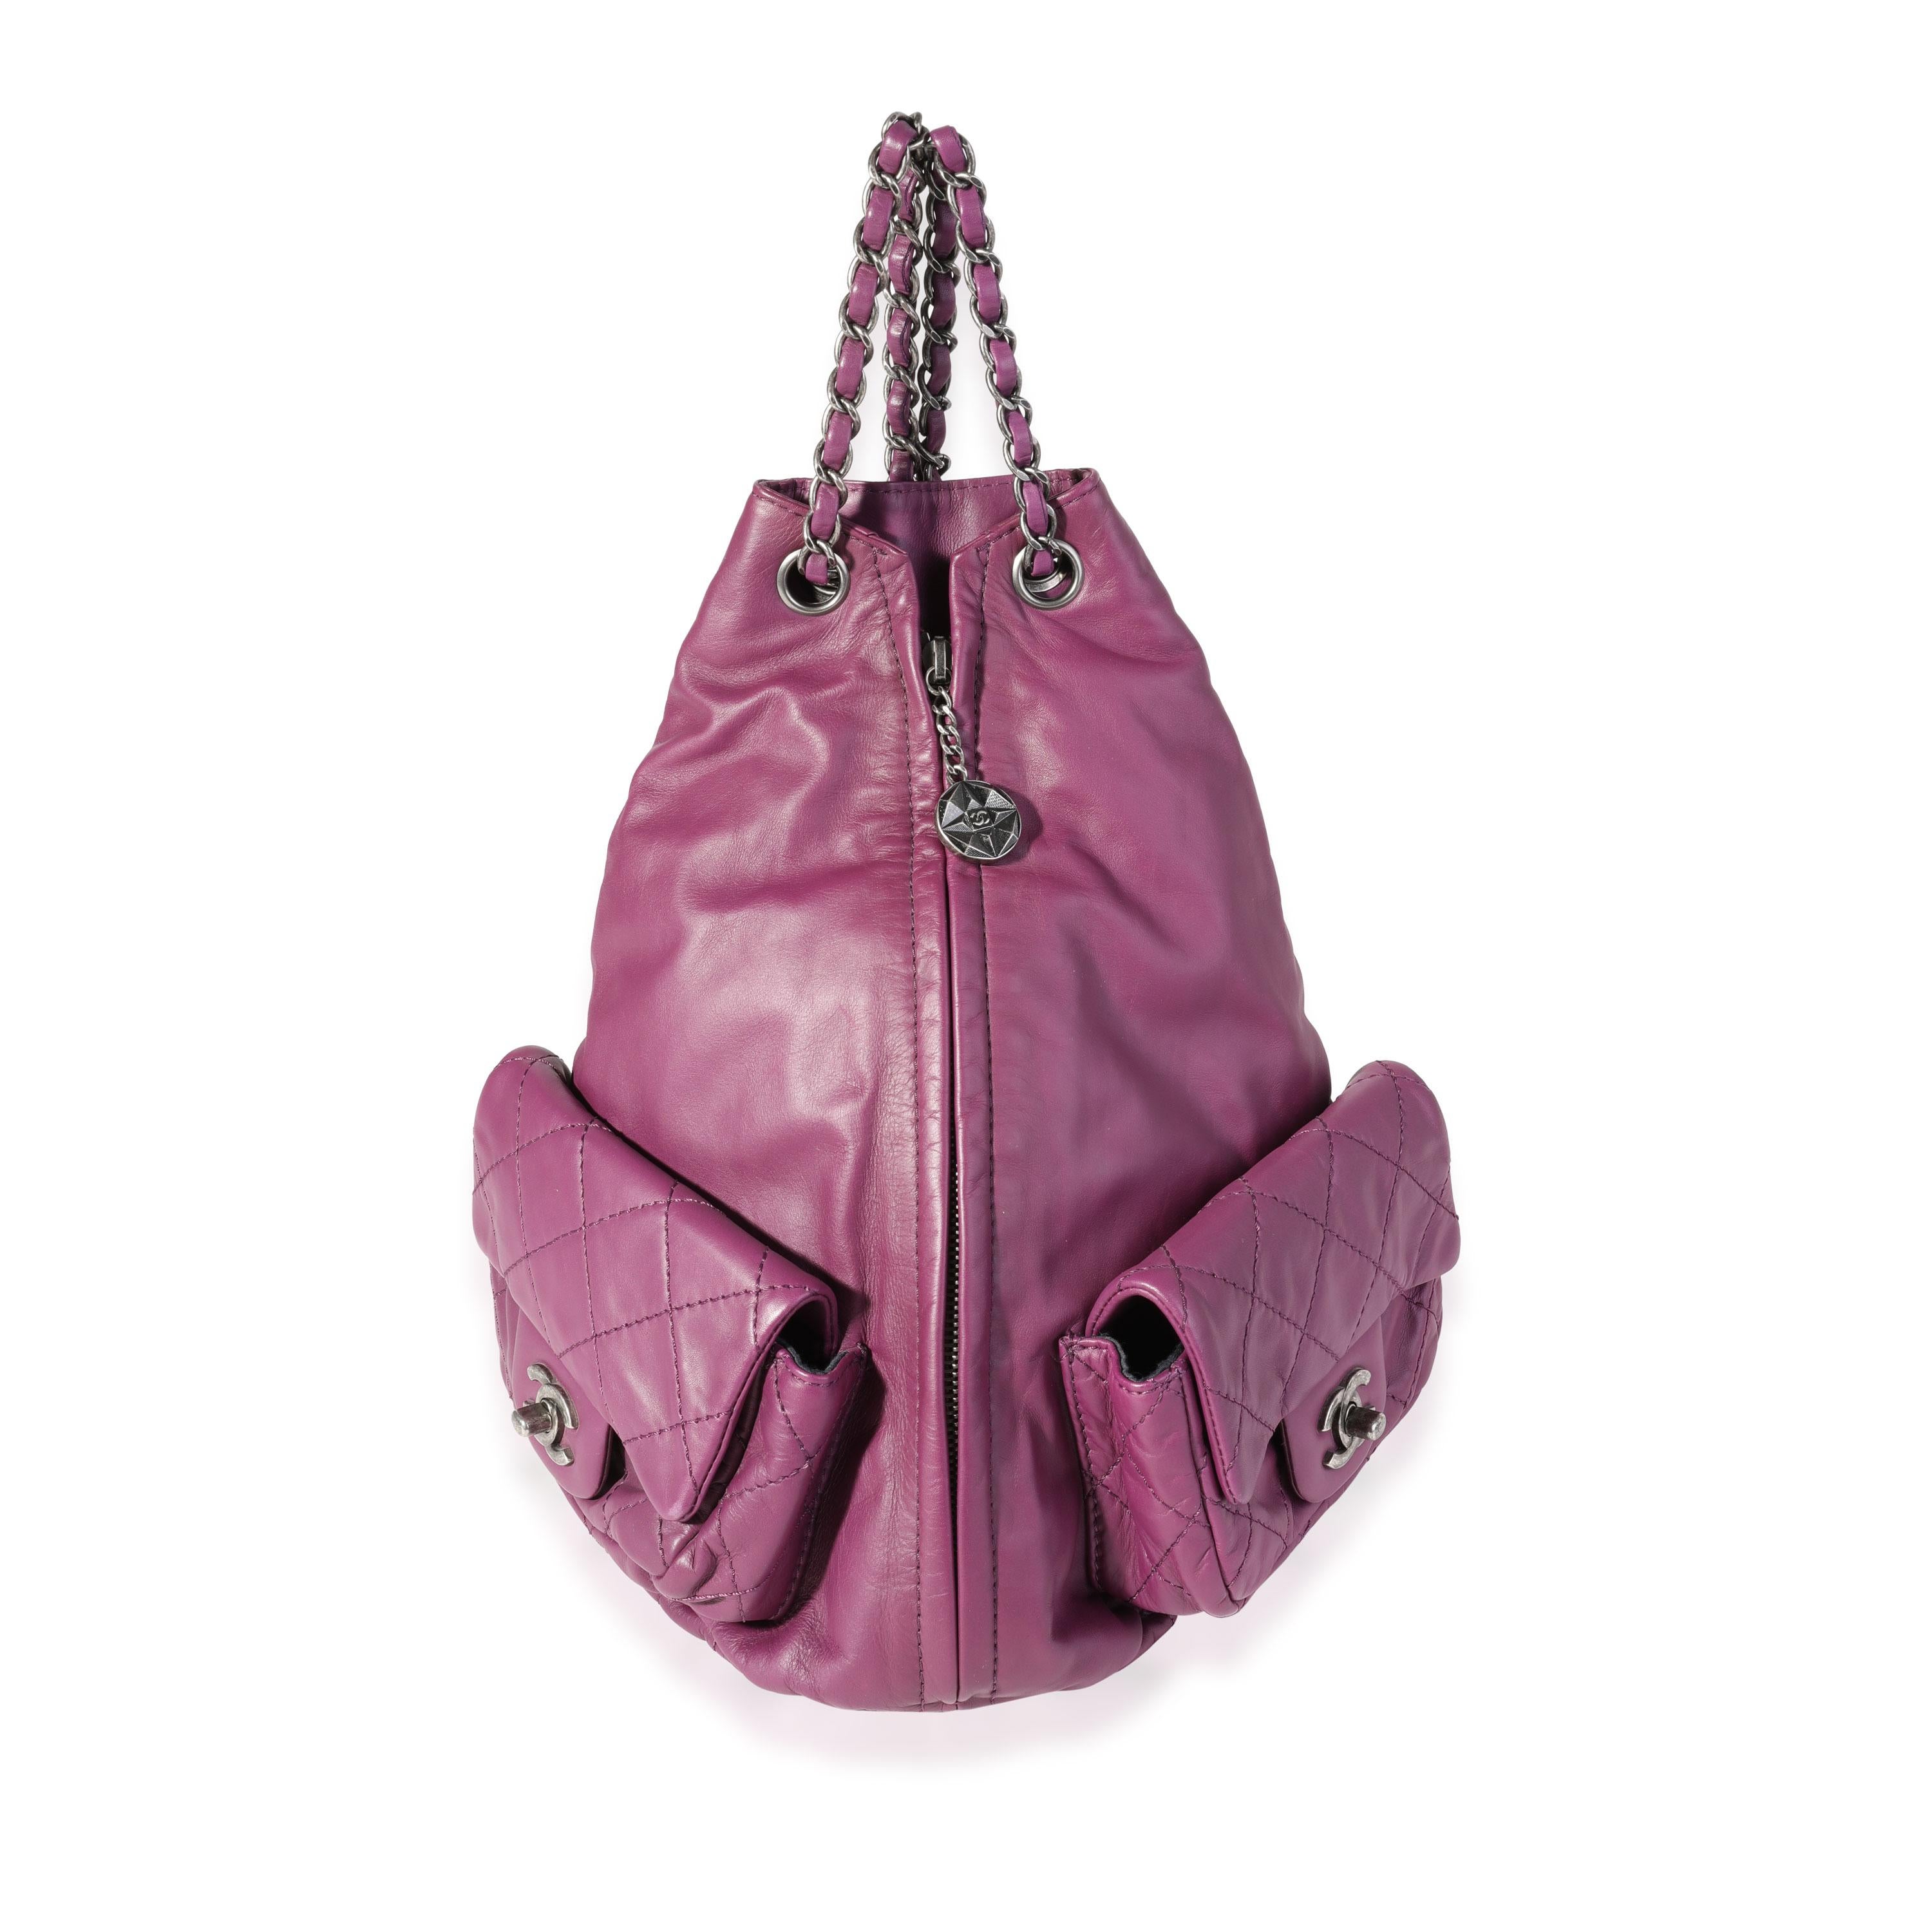 Listing Title: Chanel Purple Quilted Lambskin Backpack Is Back
SKU: 120644
Condition: Pre-owned 
Handbag Condition: Very Good
Condition Comments: Very Good Condition. Light creasing to leather.
Brand: Chanel
Model: Backpack Is Back
Origin Country: